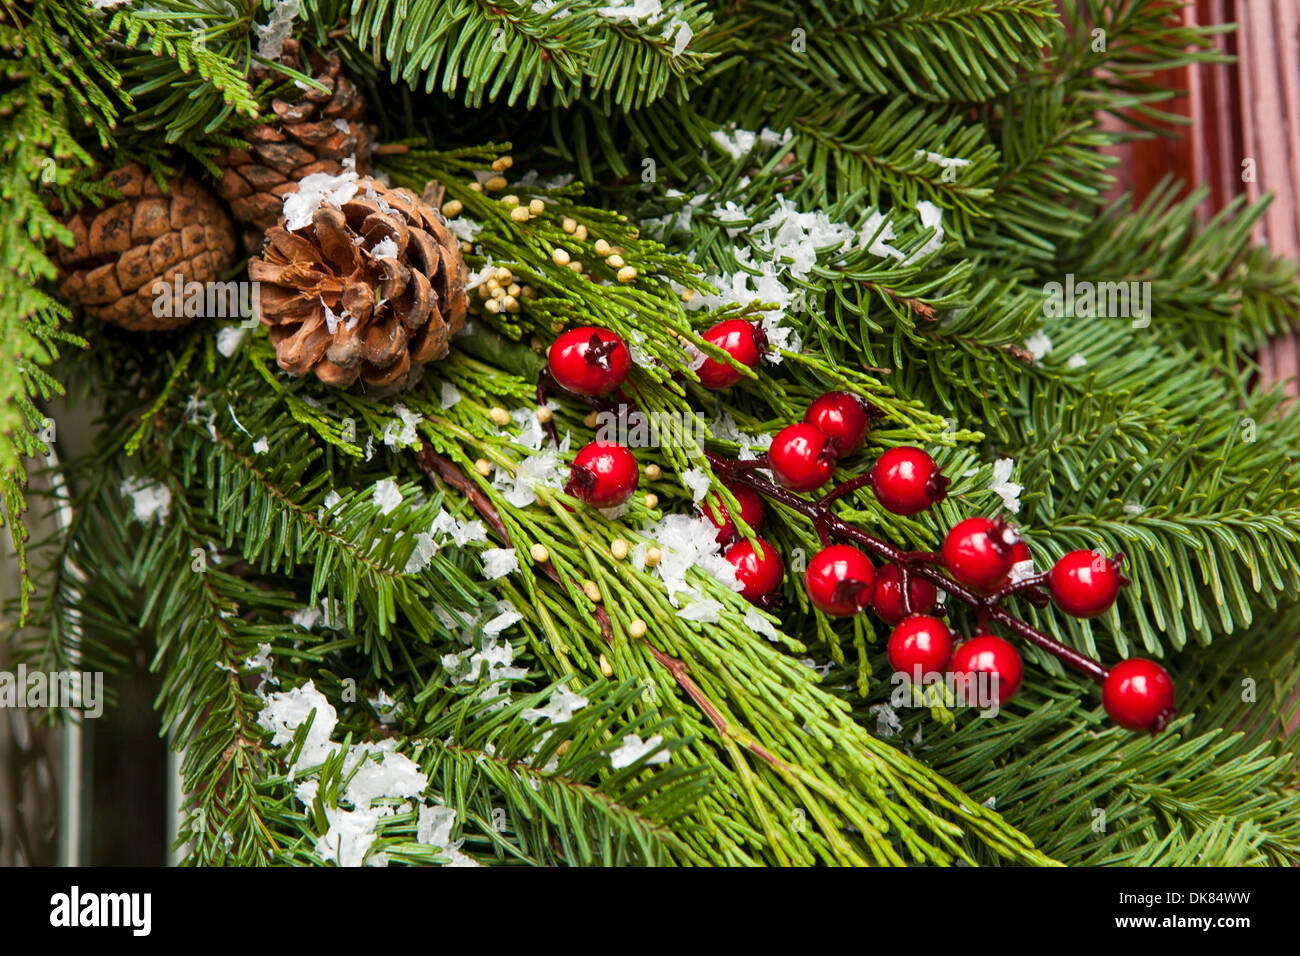 Green Holiday Christmas Decoration with Evergreen and Berries Stock Photo